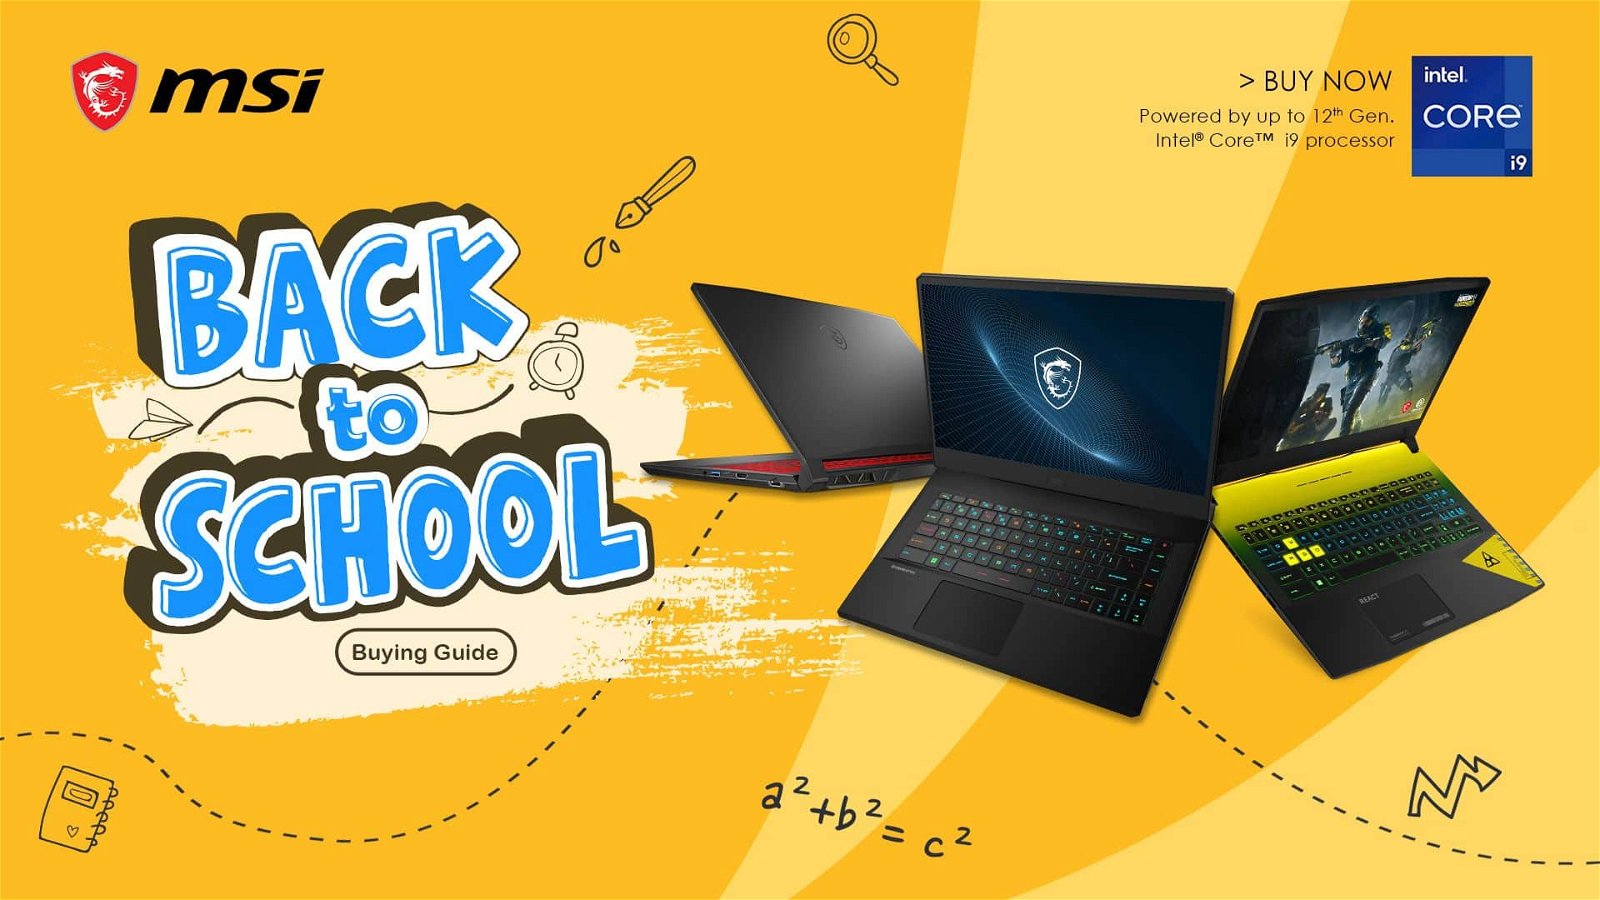 MSI Goes Back to School With Huge Laptop Deals